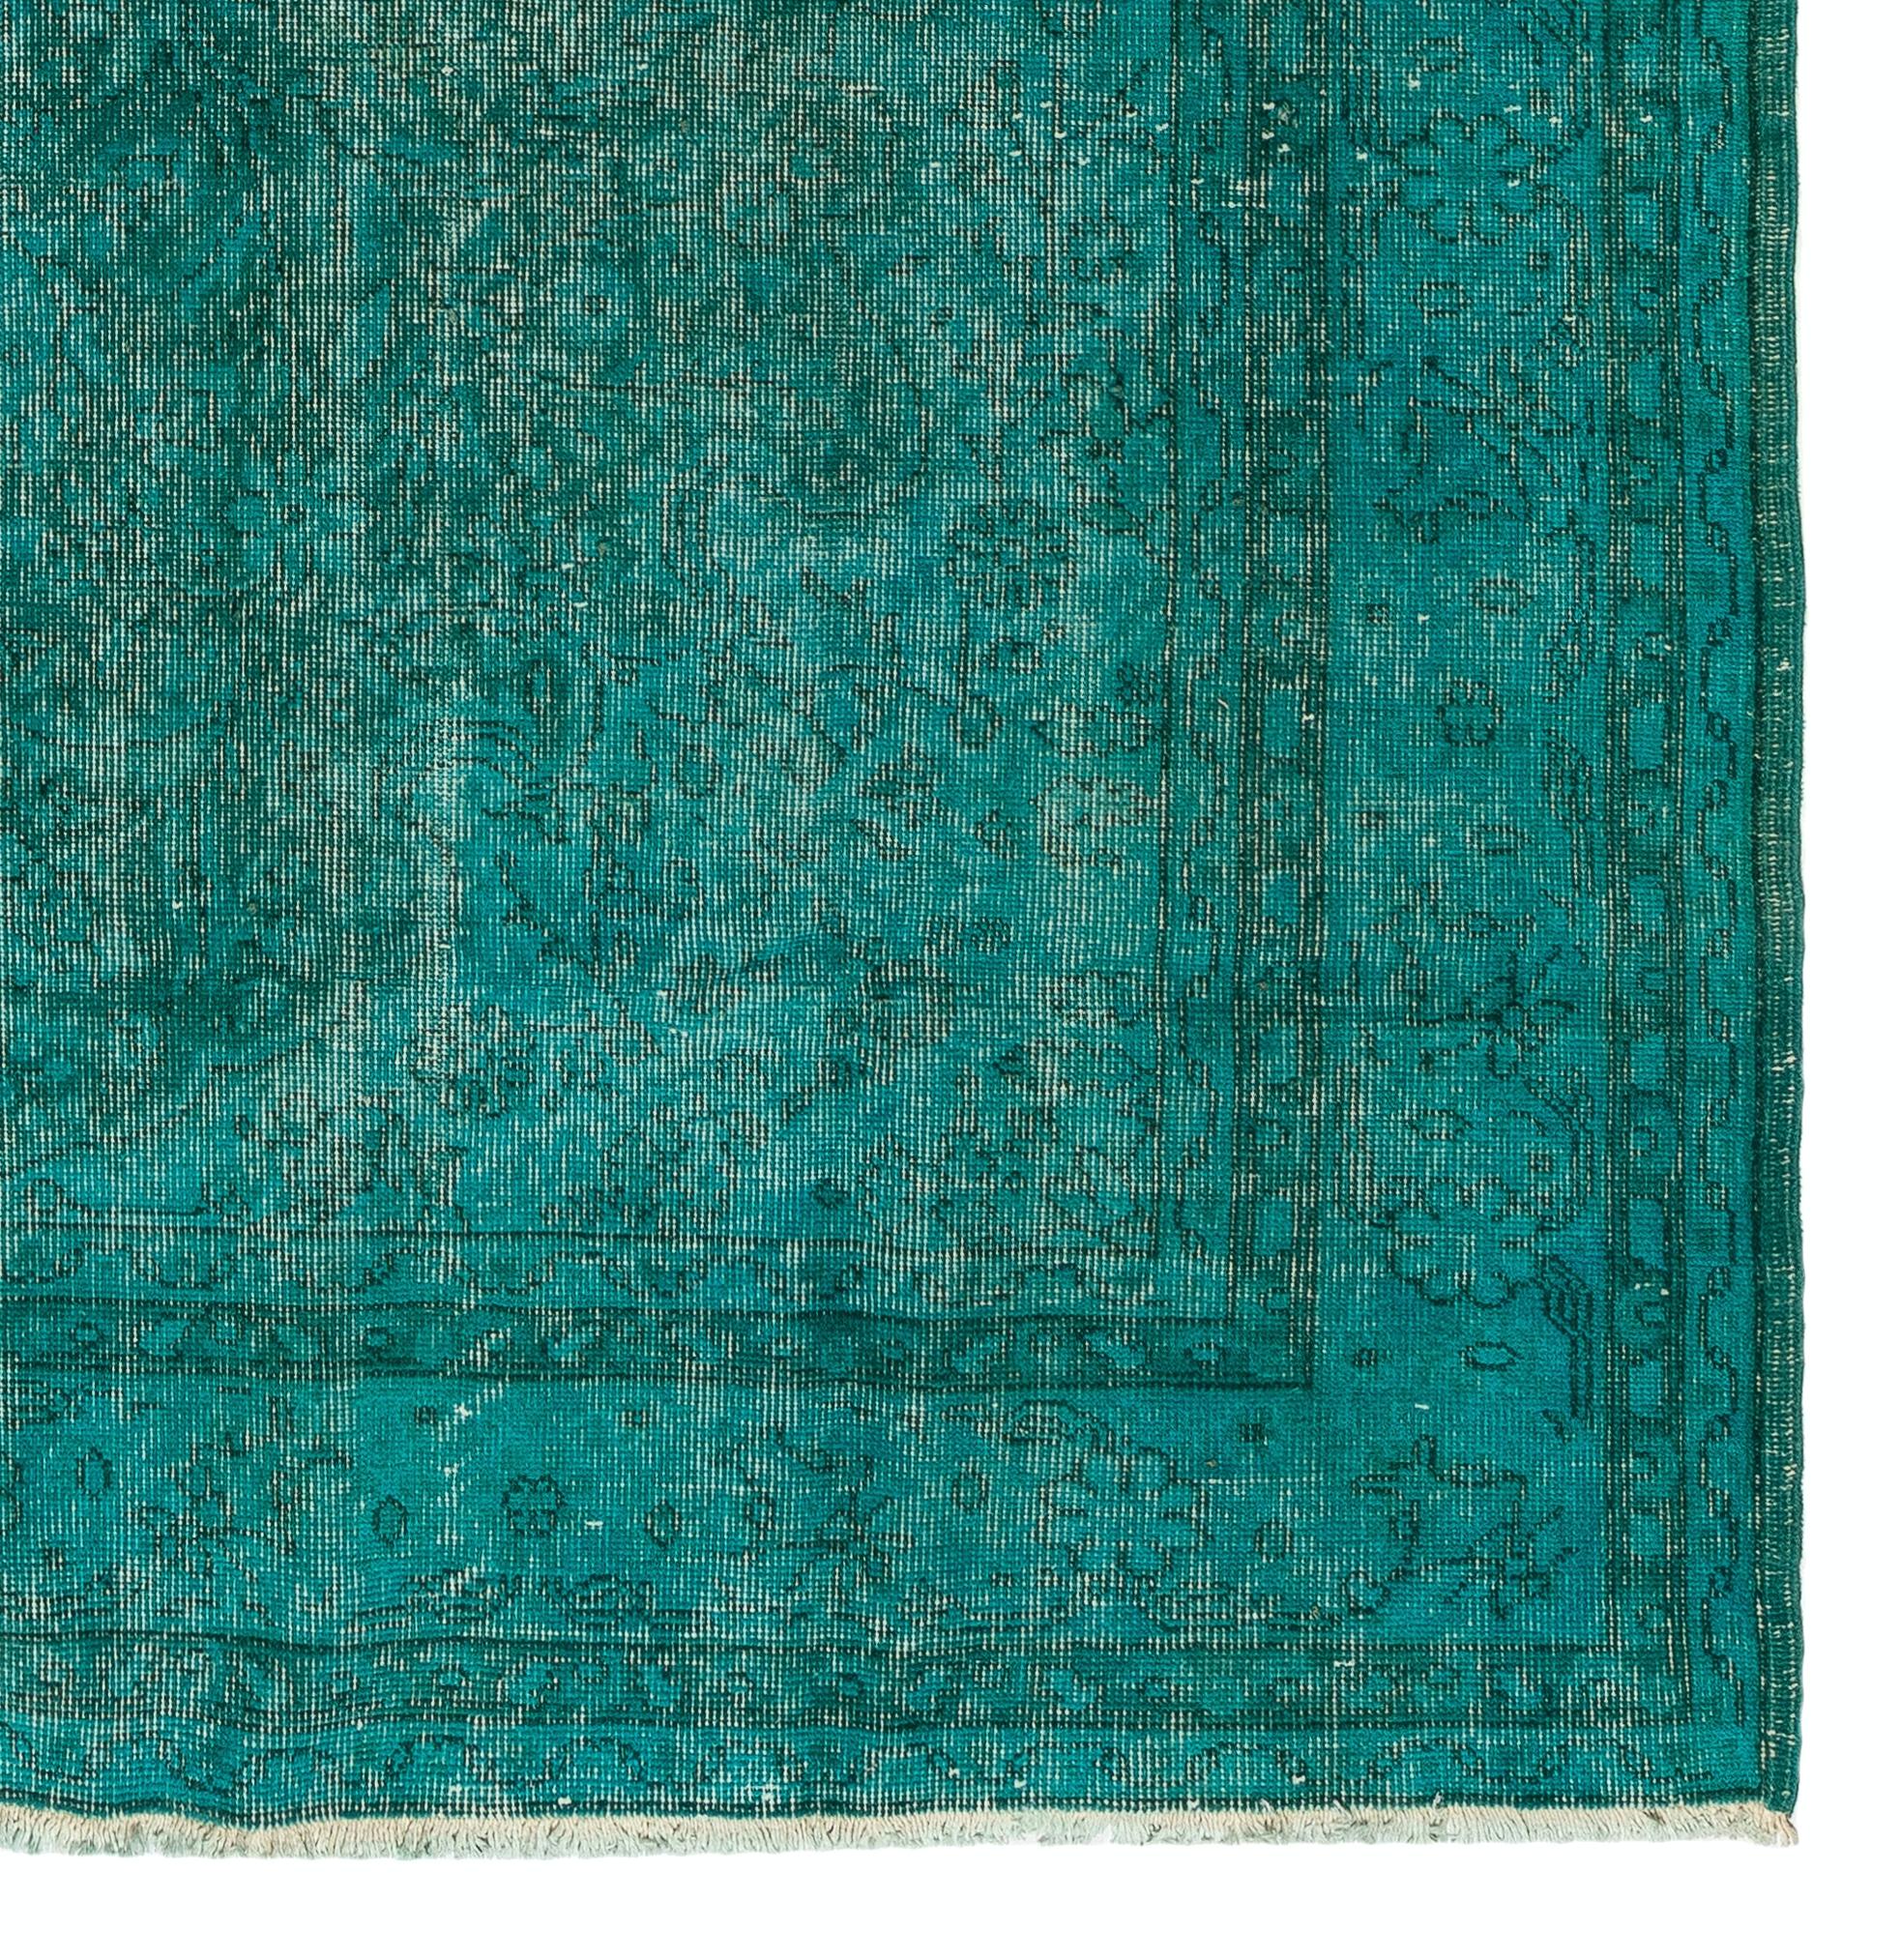 Wool 6.6x10.6 Ft Turquoise Blue Color ReDyed Vintage Turkish Rug for Modern Interiors